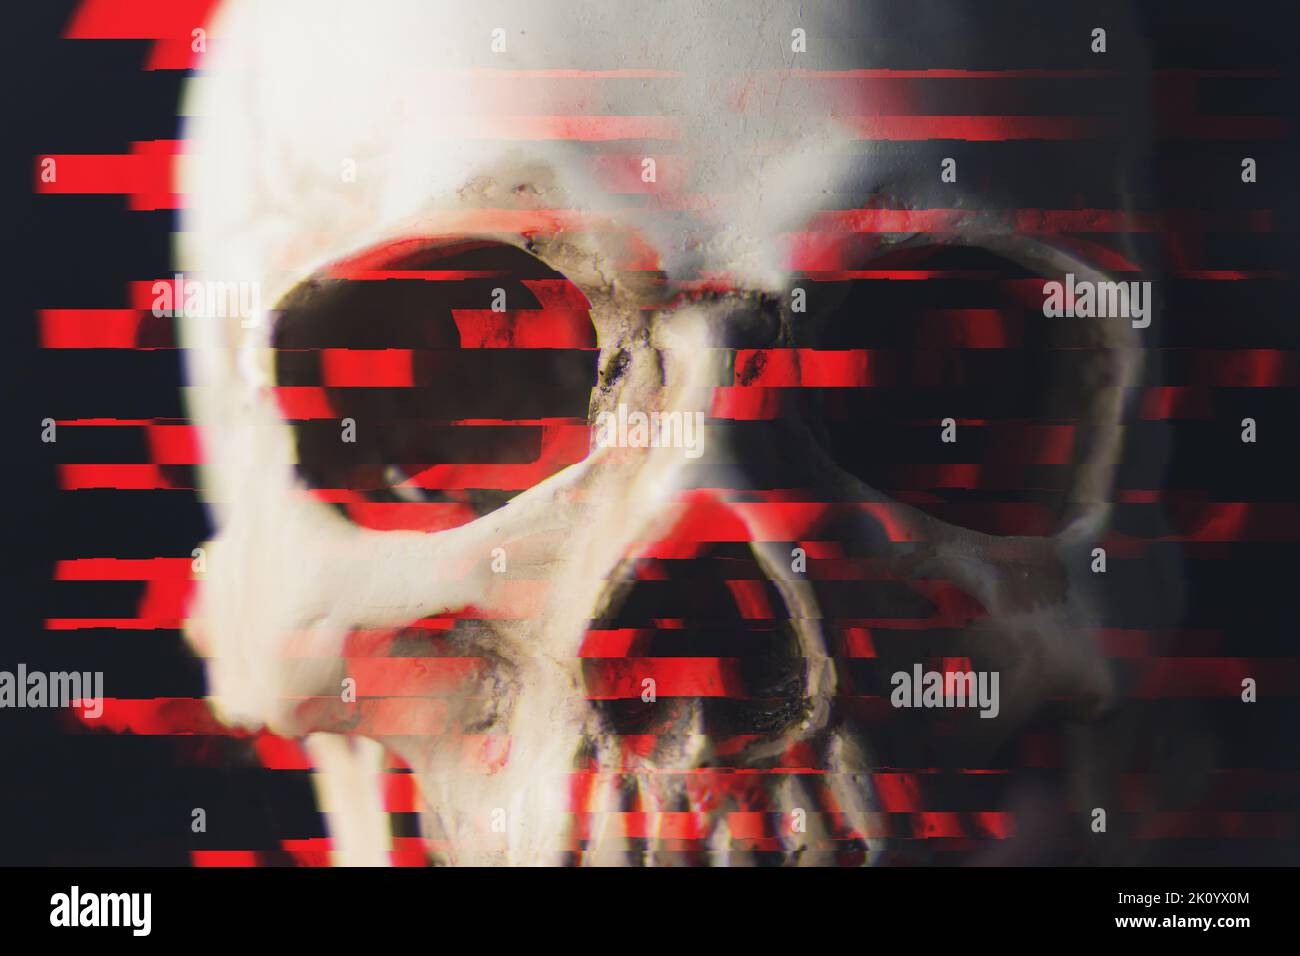 Closeup illustration of white human skull agains black background with red diffused light pixels chromatic aberration. Gothic vibes. Death concept. High quality illustration Stock Photo